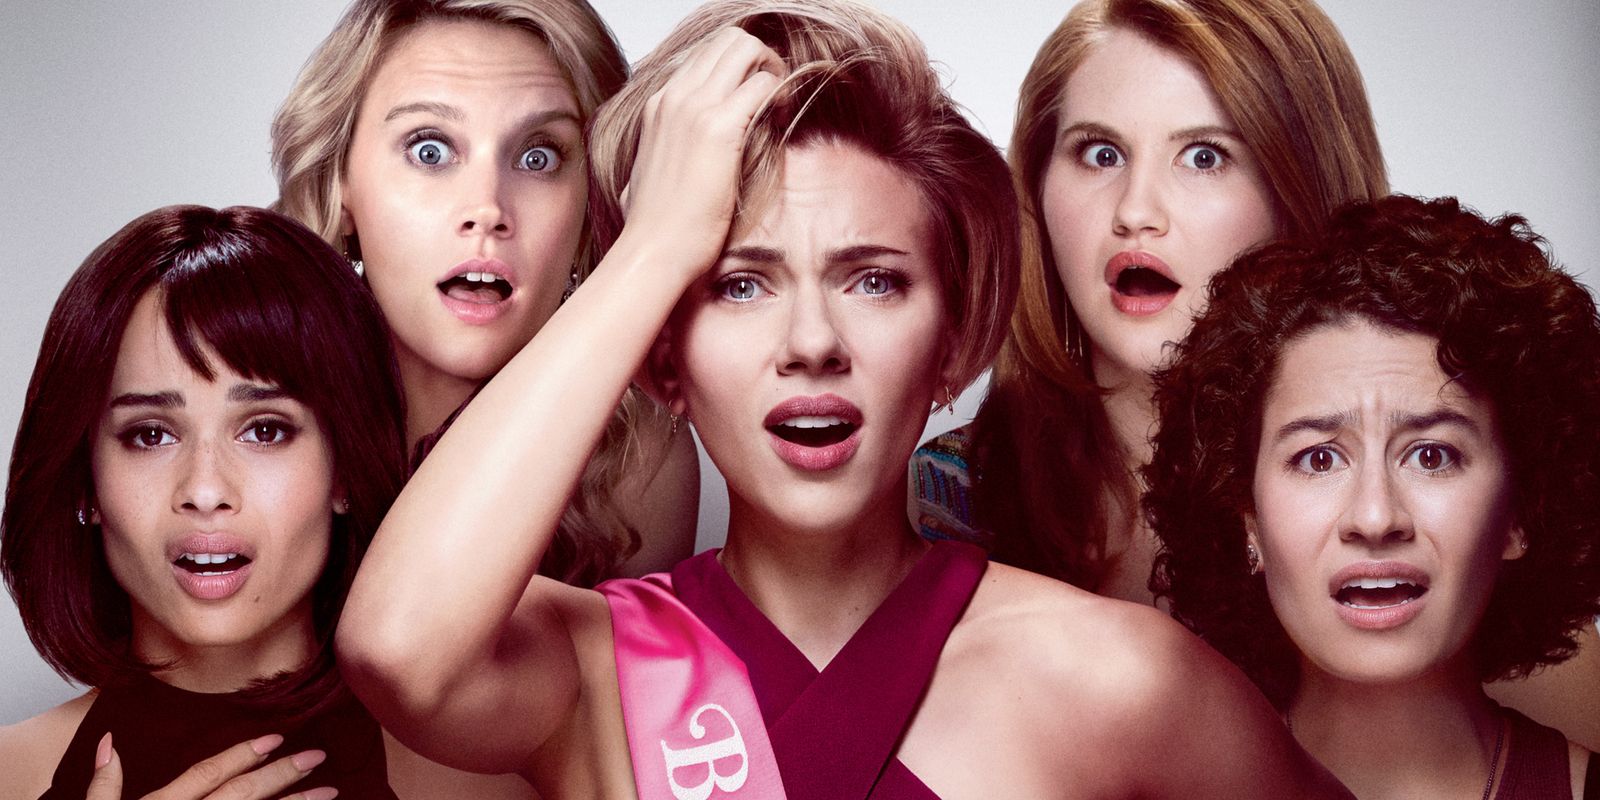 The bride and bridesmaids of Rough Night appearing shocked in a crop of the movie poster